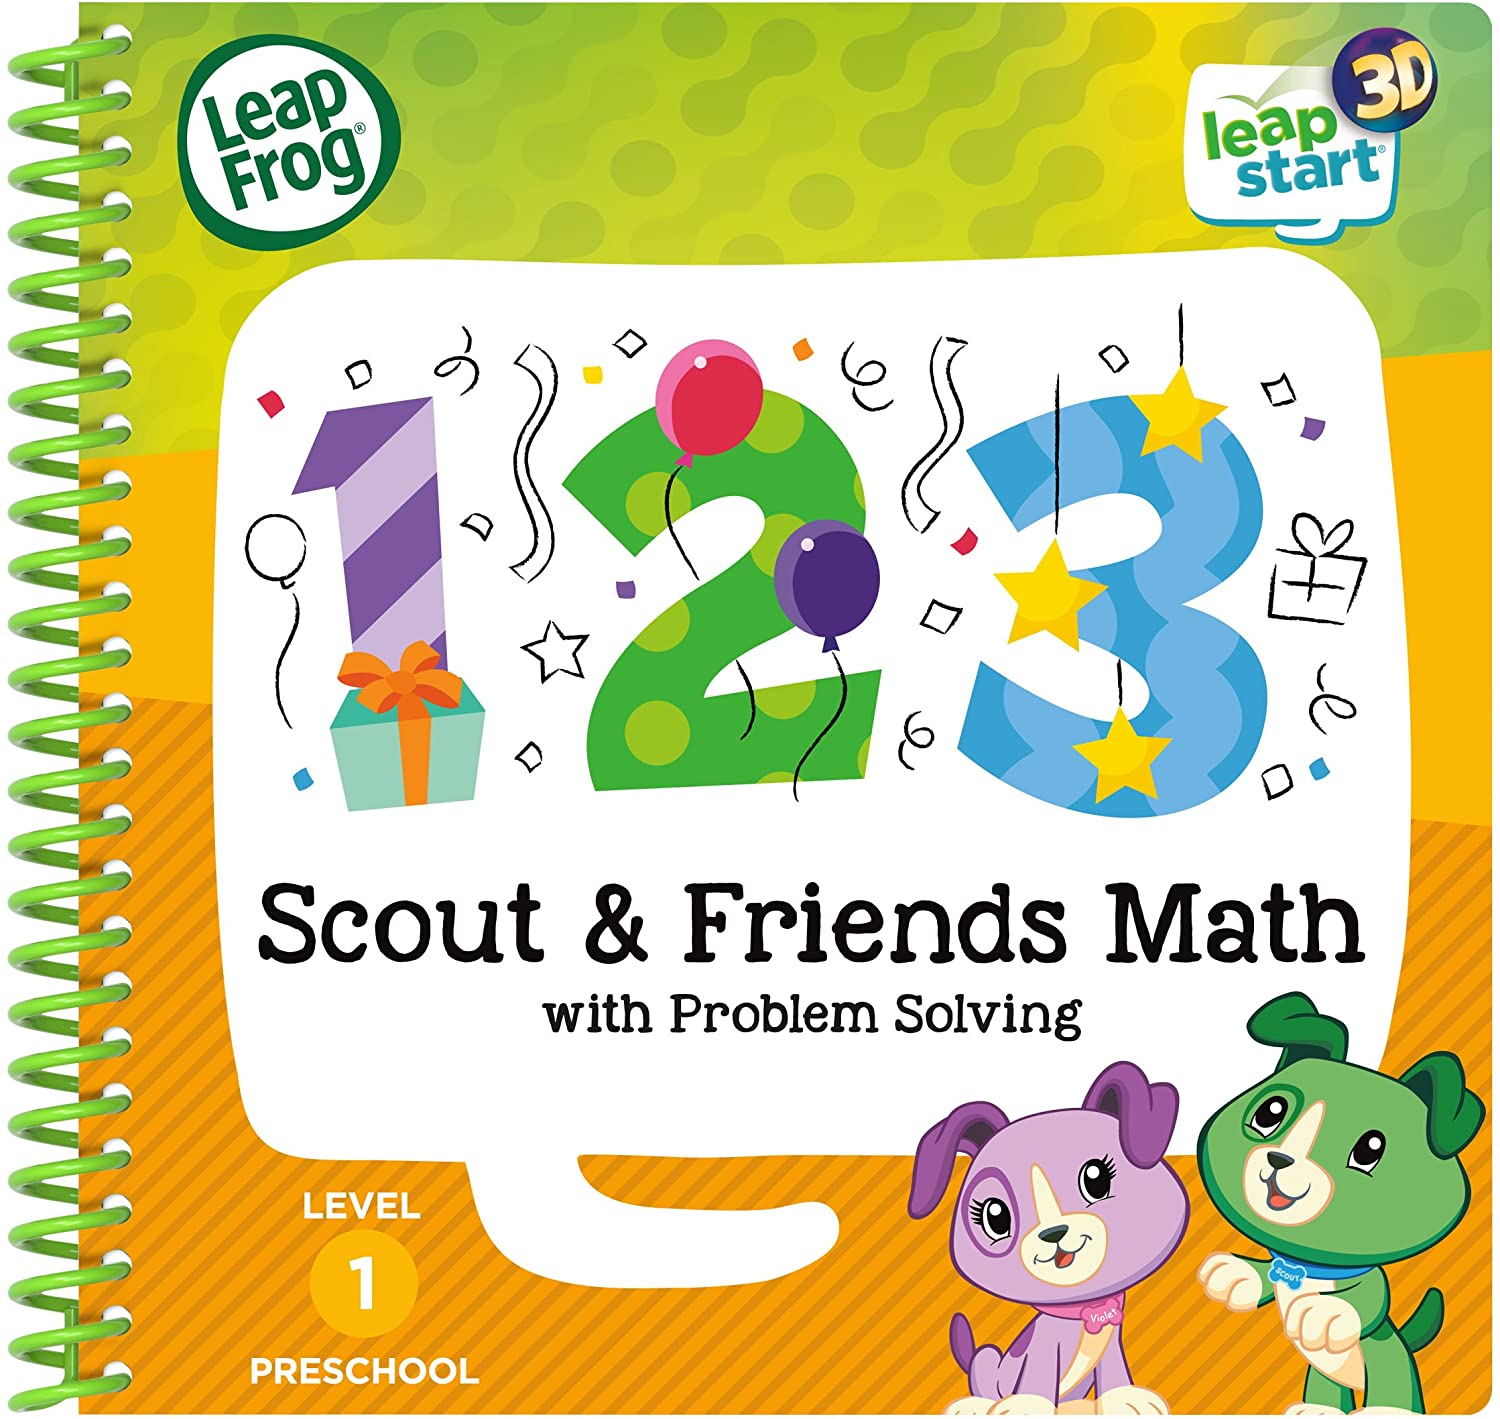 LeapFrog 460703 Scout & Friends 3D Activity Book Learning Toy, Multi, One S